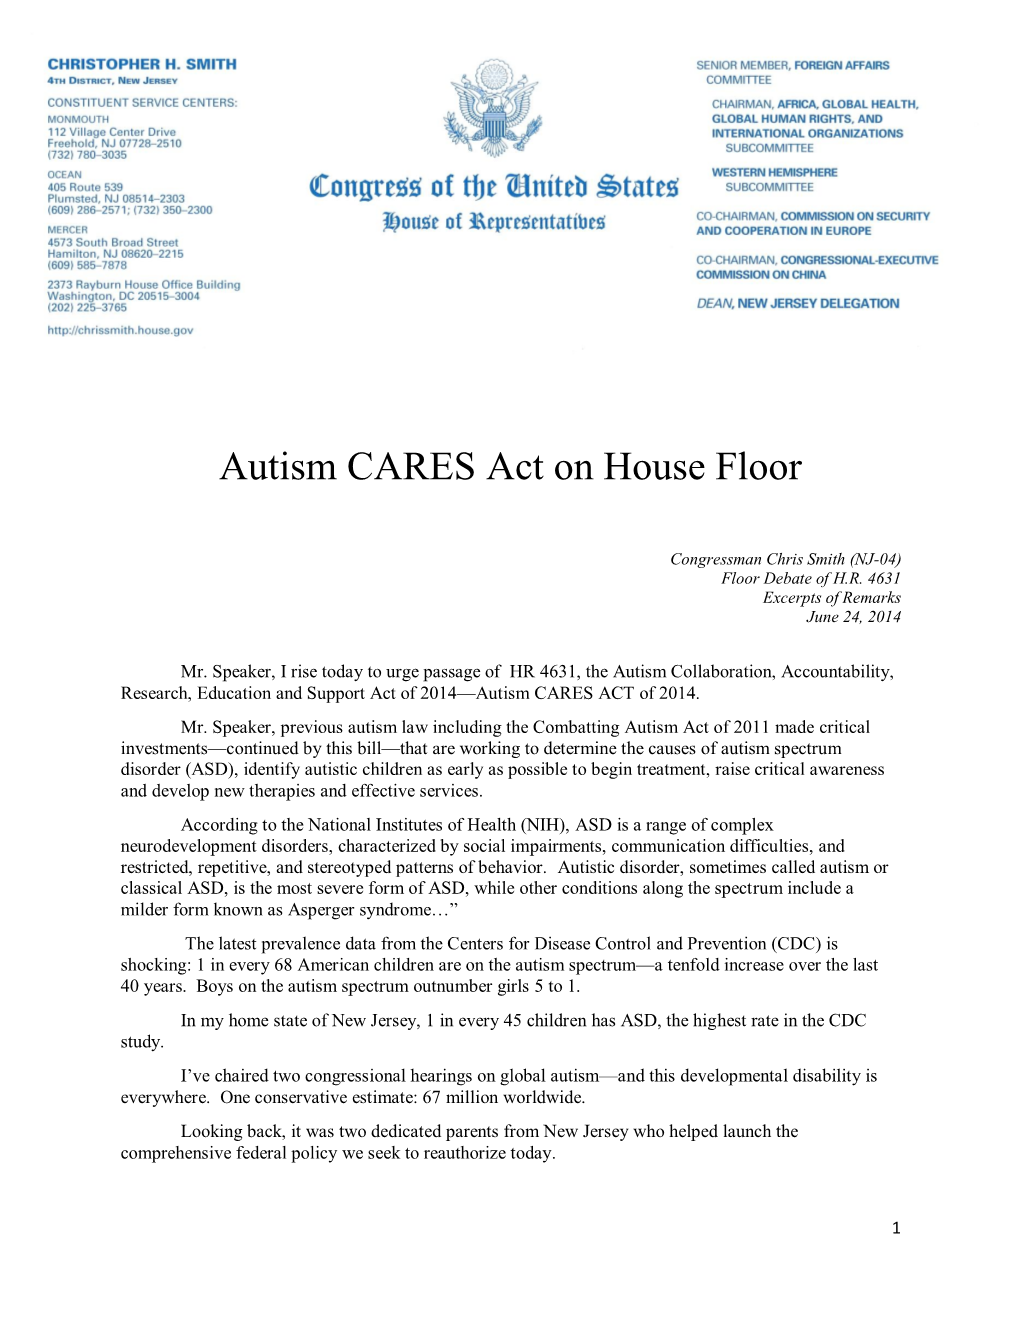 Autism CARES Act on House Floor